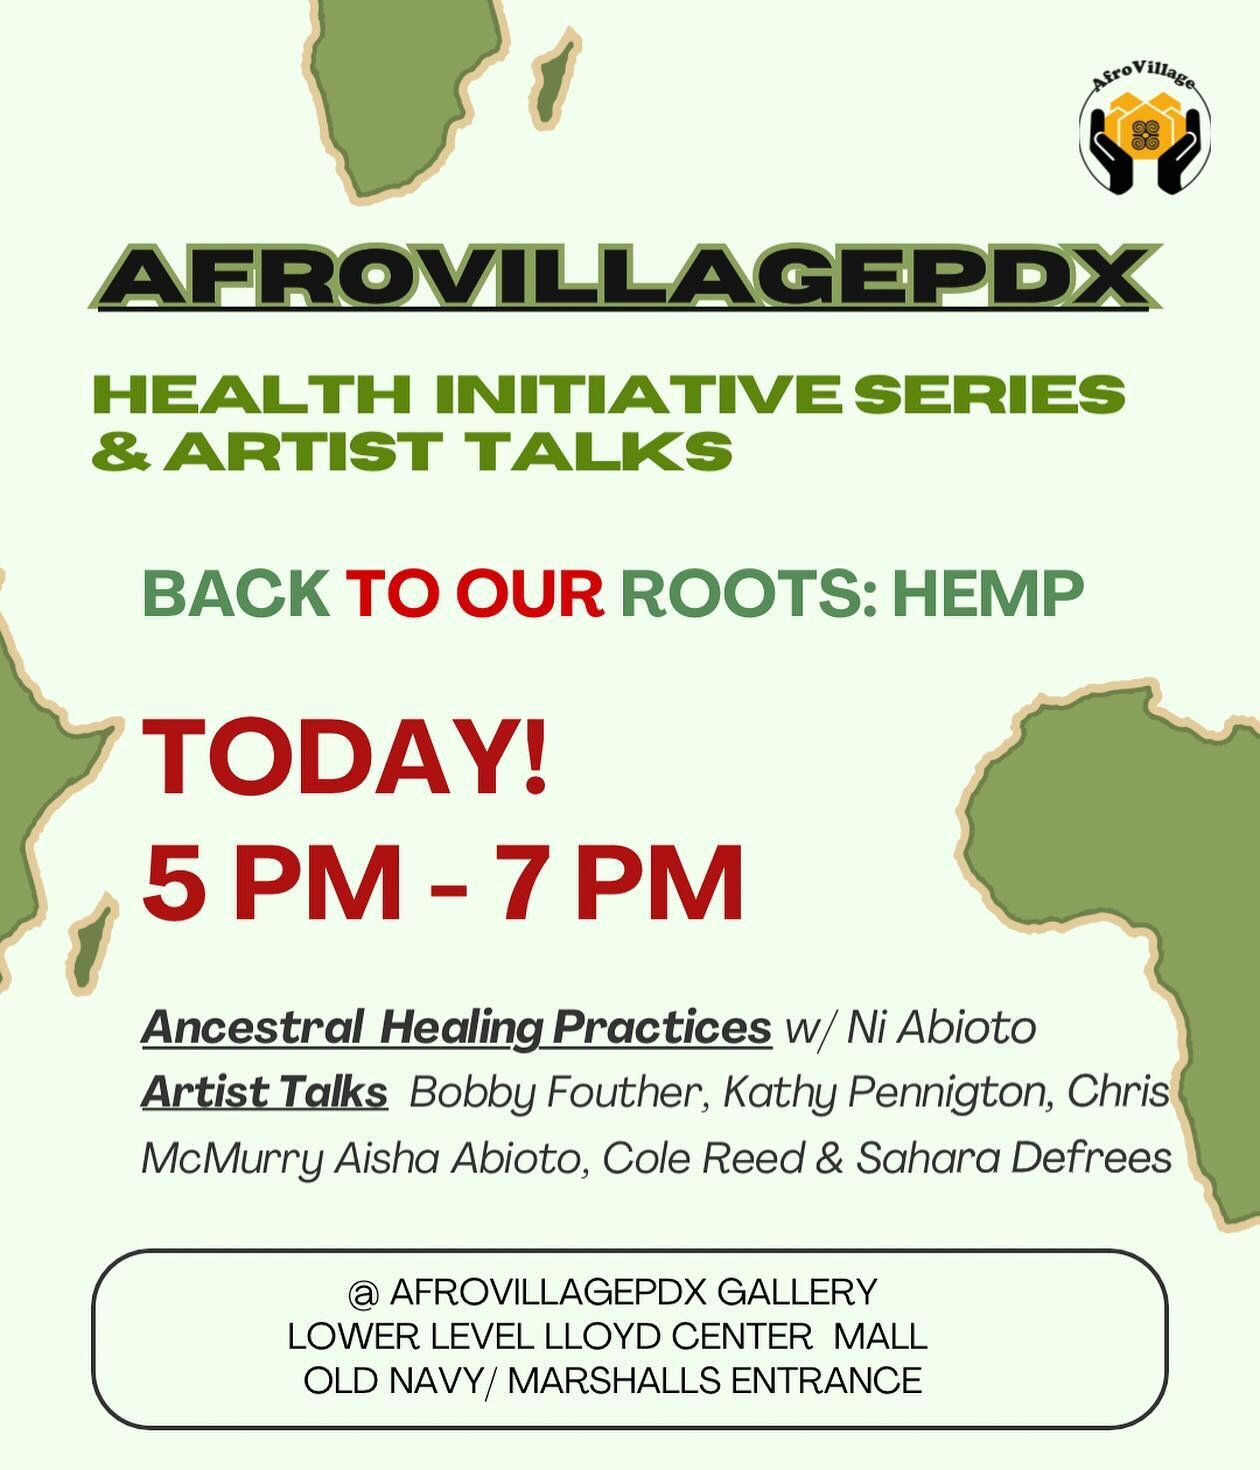 🚨Closing ceremony for &ldquo; Healing Our Roots: Our Relationship To Tobacco, Cotton, Sugar Cane and Hemp&rdquo;. Tonight is the last event and .Ni Abioto will speak on hemp filtered through magically hoodoo &amp; ecological historically accurate le